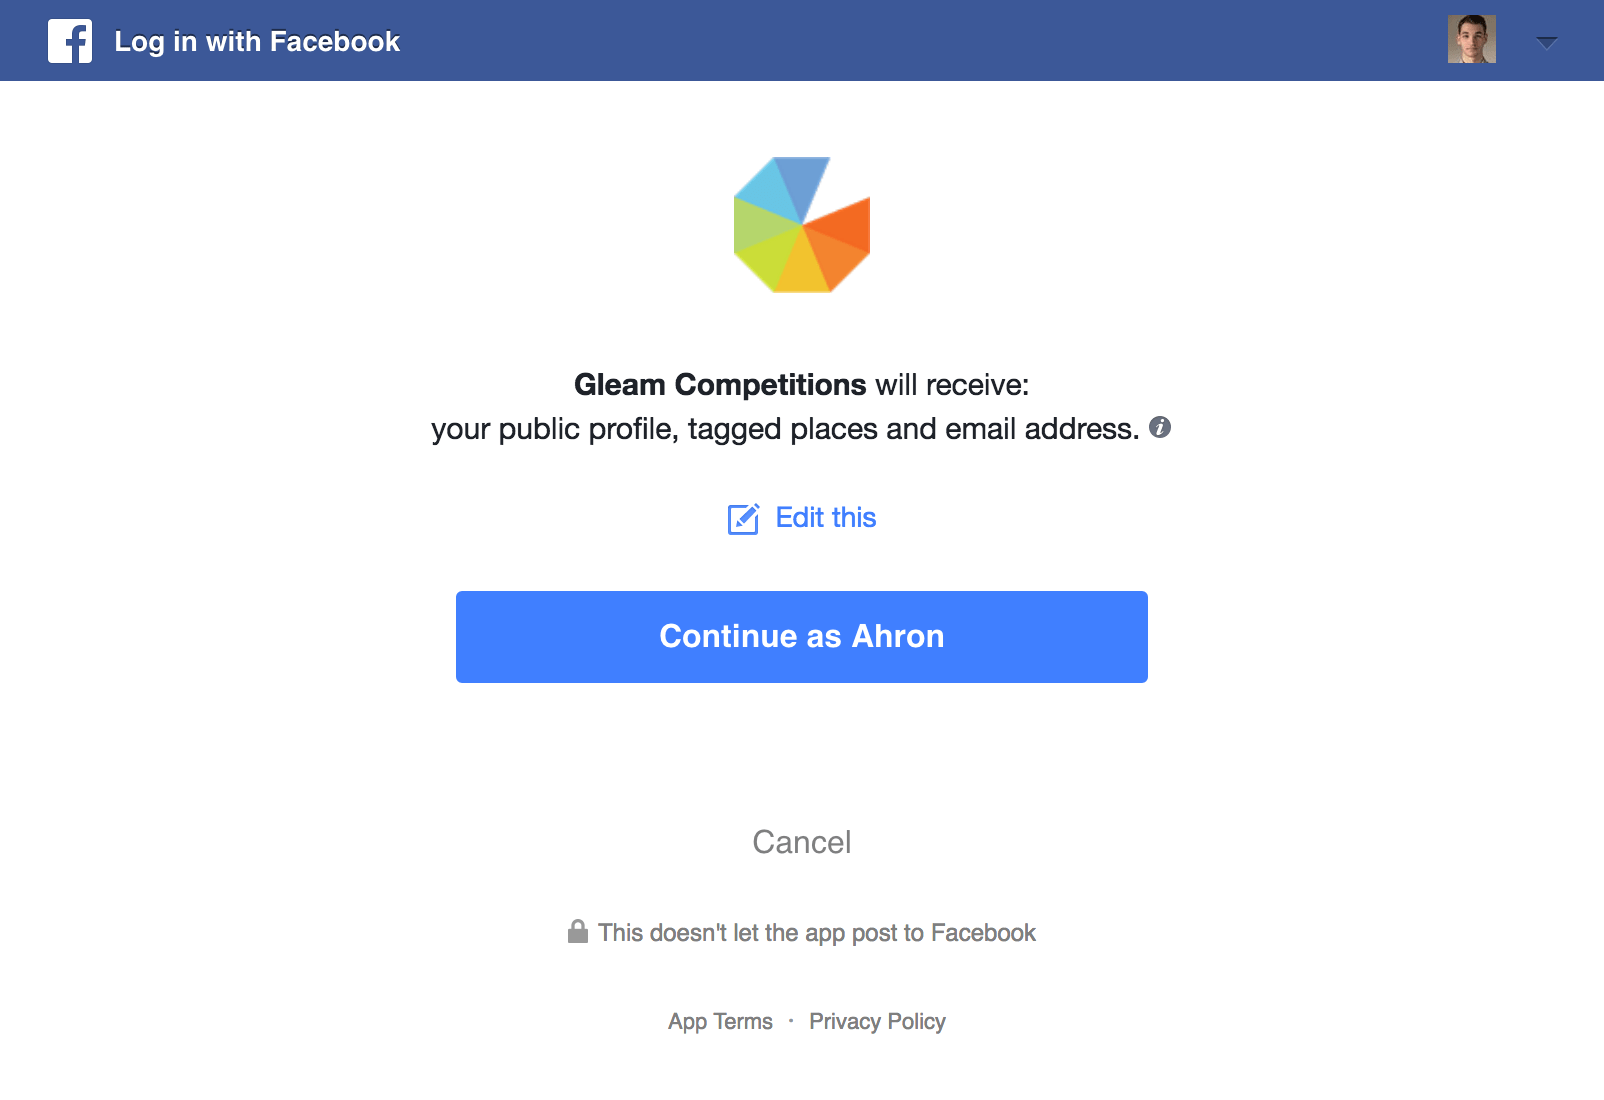 Facebook authorization page for Gleam